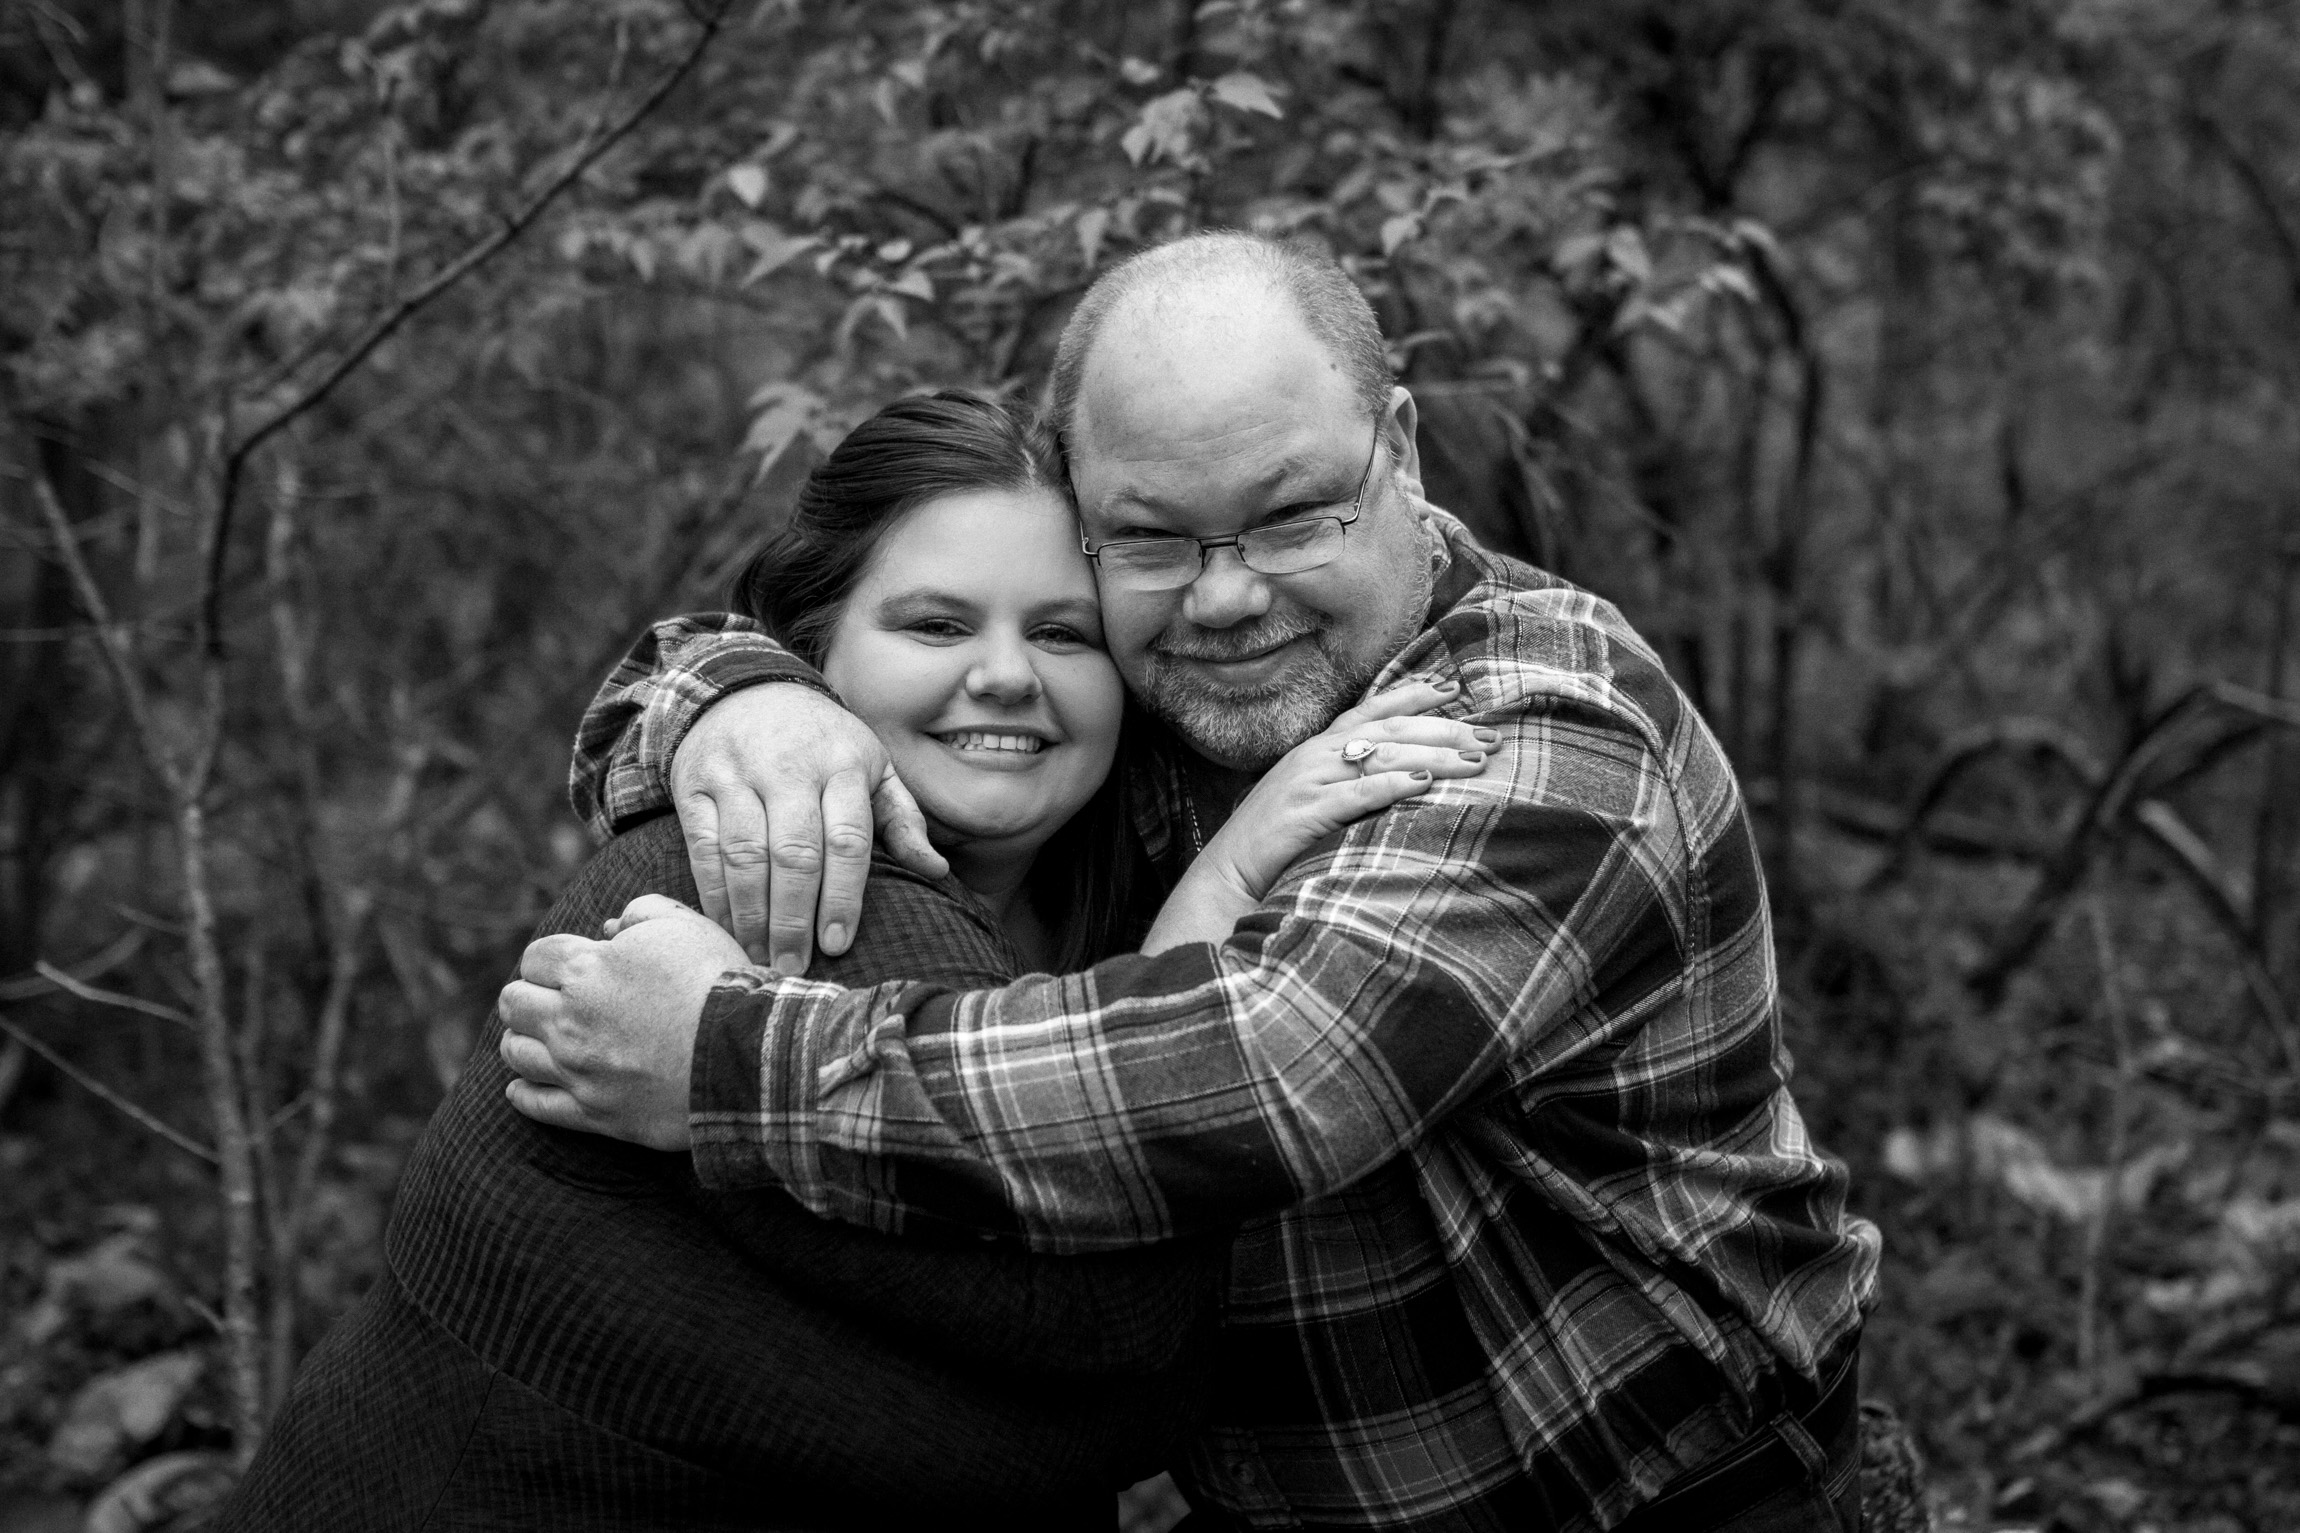  Kansas City lifestyle photographer, Kansas City family photographer, extended family session, fall family photos in the woods, father and grown daughter hugging, black and white photo 